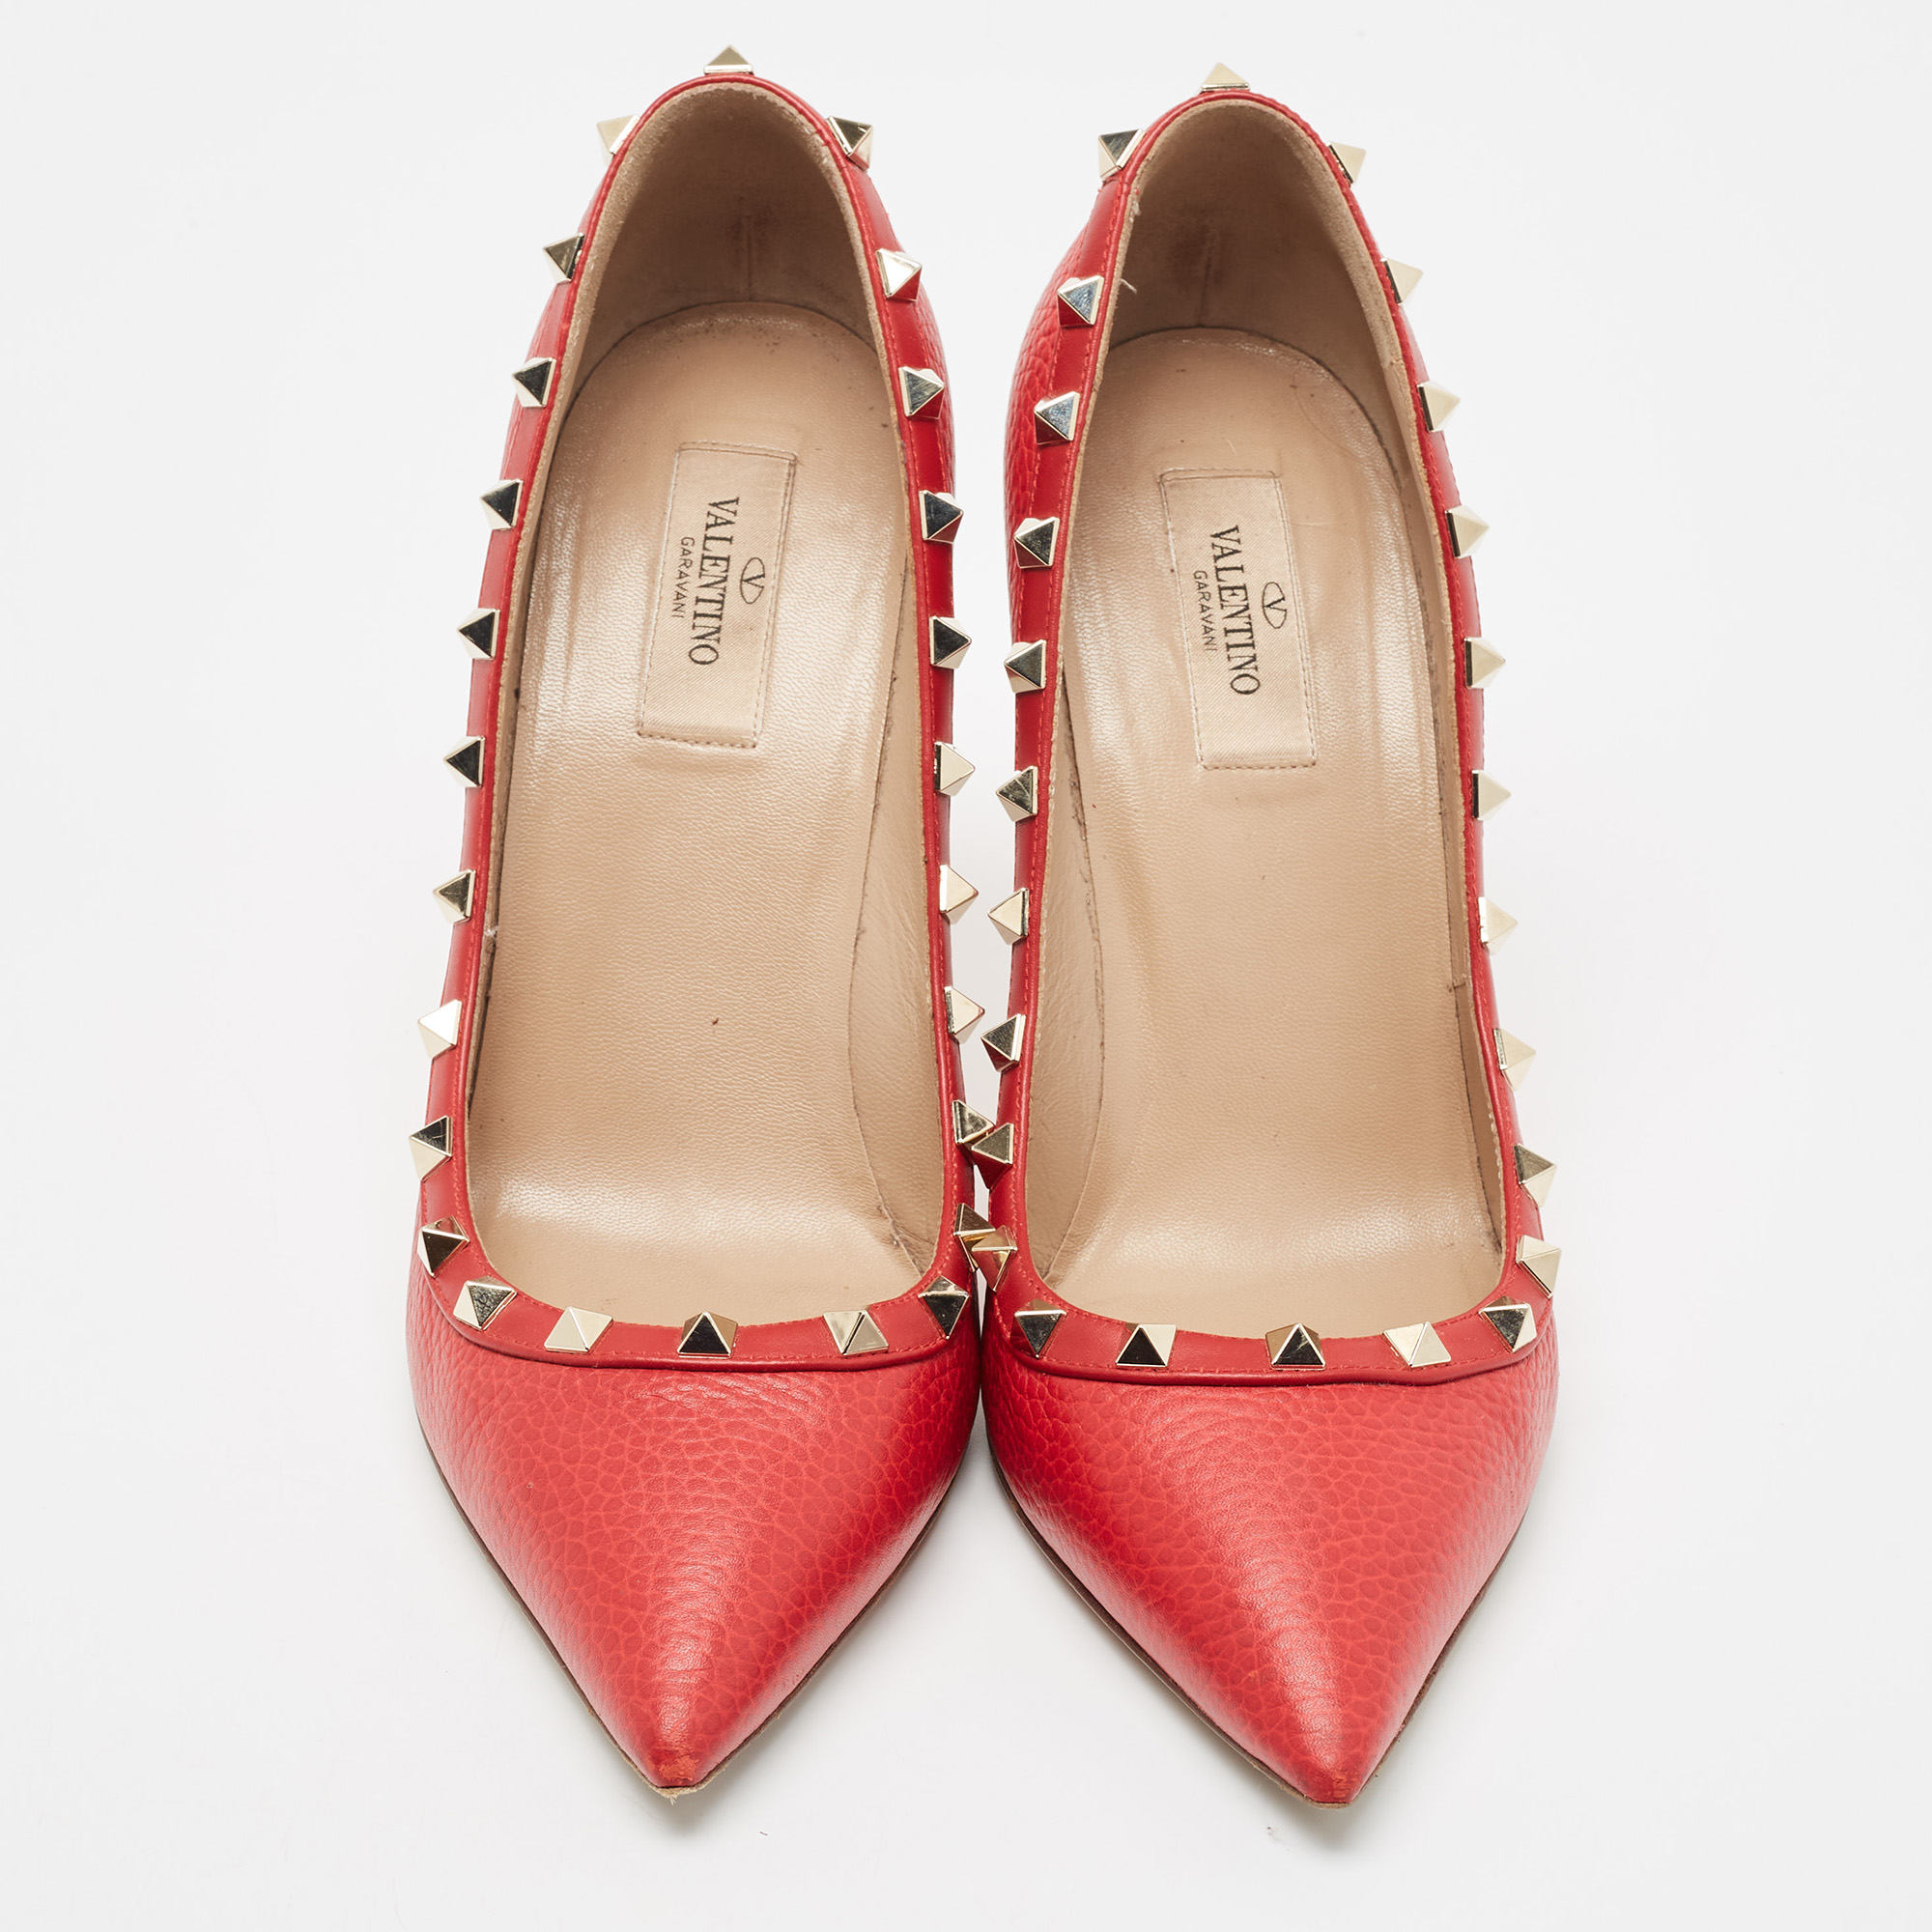 Valentino Red Grained Leather Rockstud Pumps Size 40.5